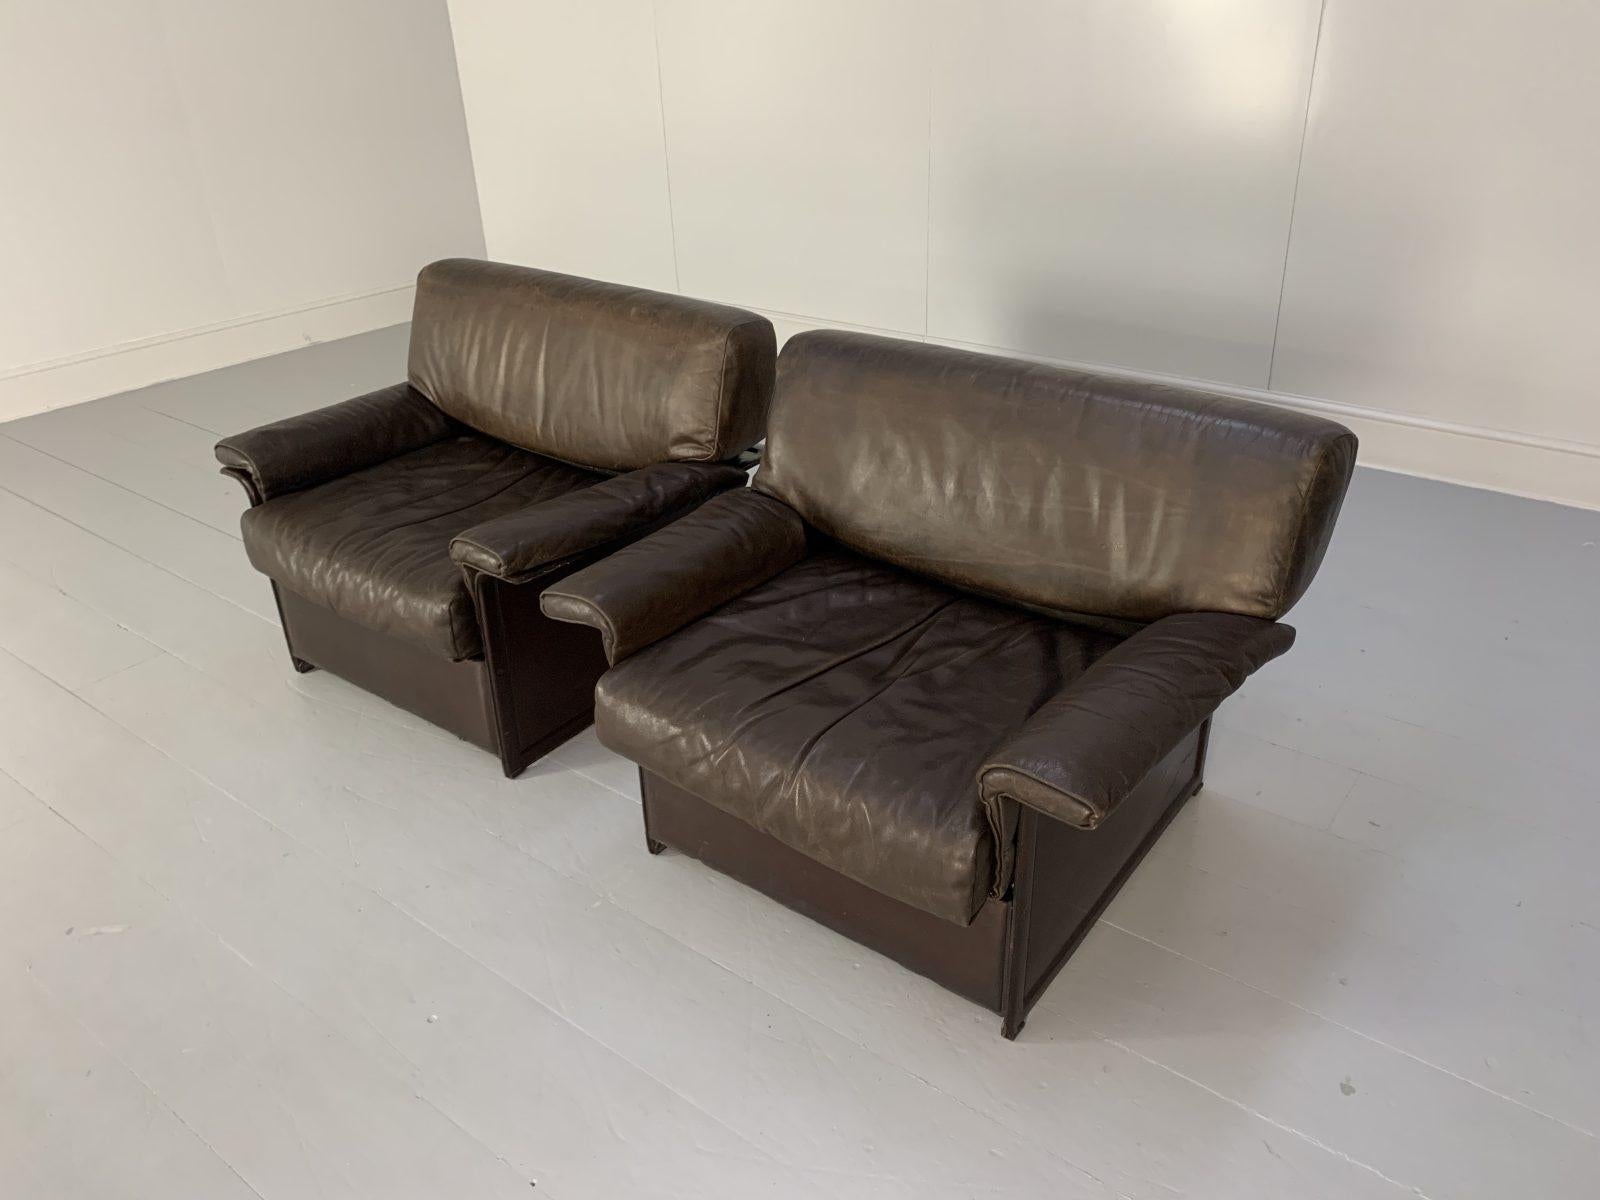 Pair of Matteo Grassi “Tm” Armchairs – in Vintage Brown Leather In Good Condition For Sale In Barrowford, GB